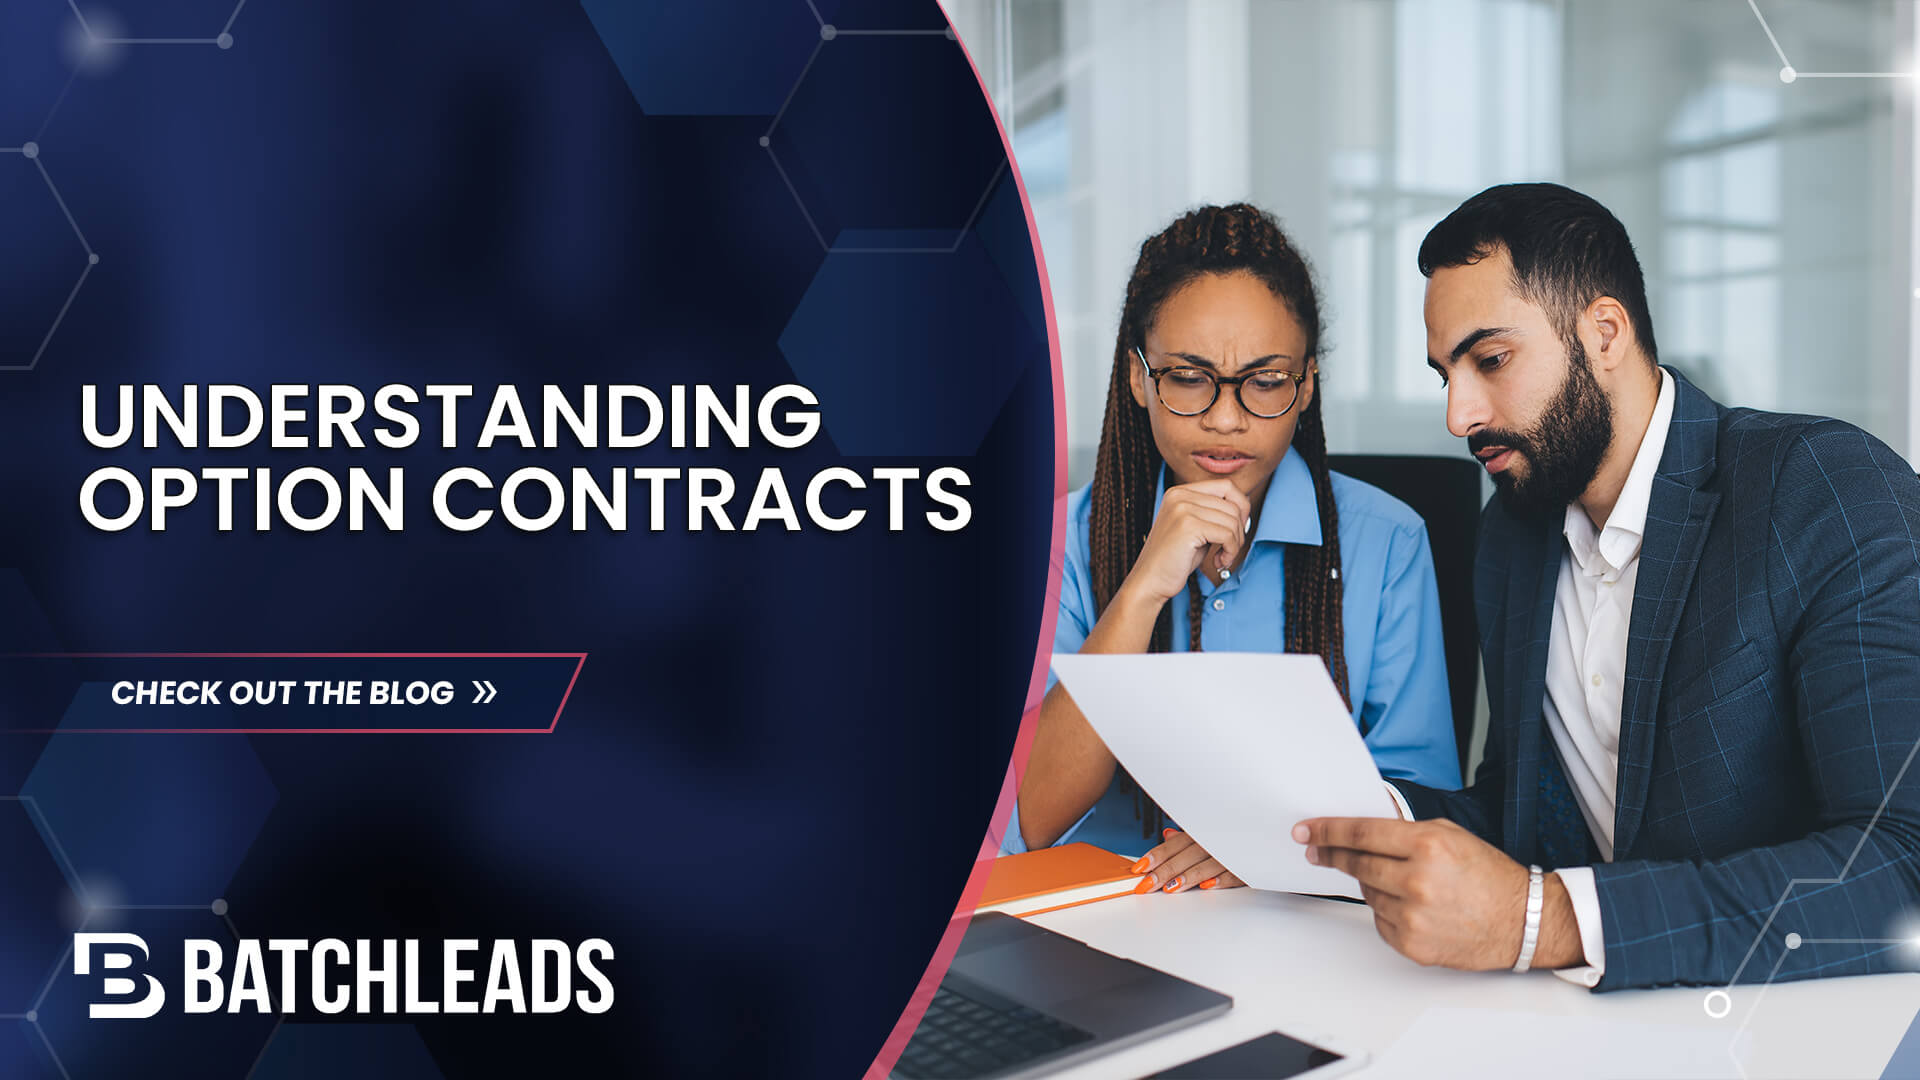 Option contracts in wholesaling real estate deals